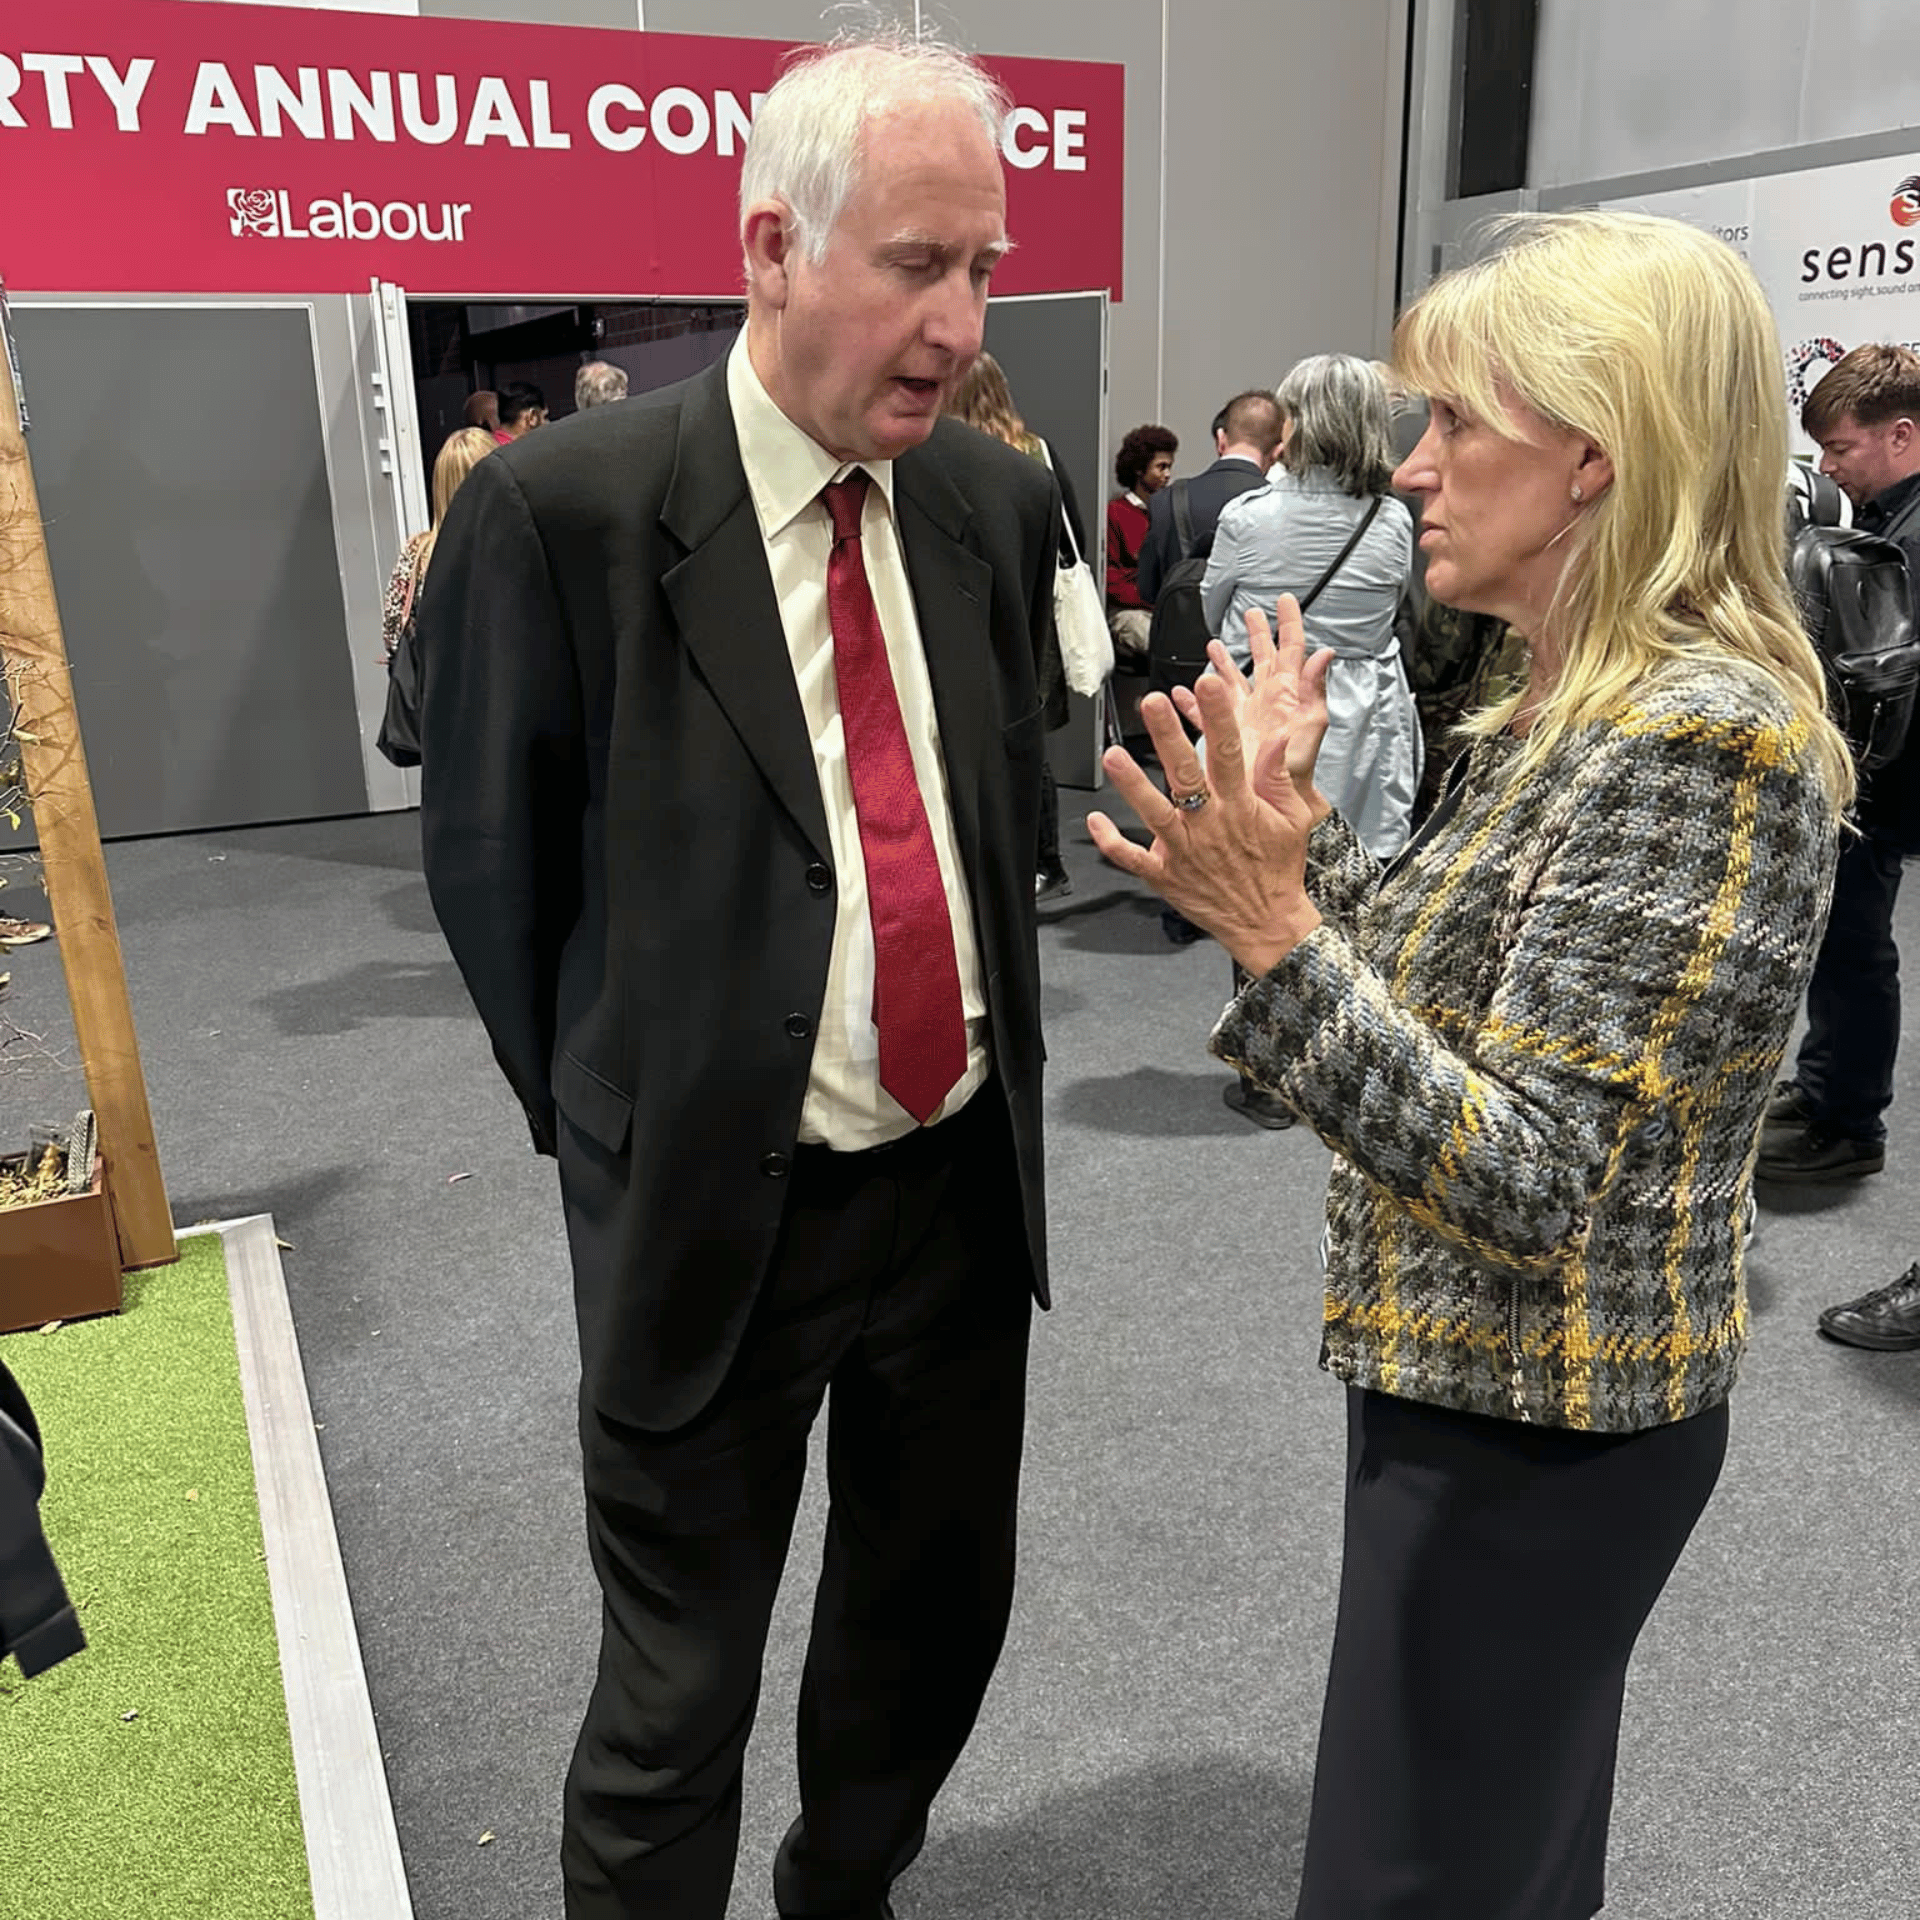 Shadow Minister for Environment, Food and Rural Affairs Daniel Zeichner MP
